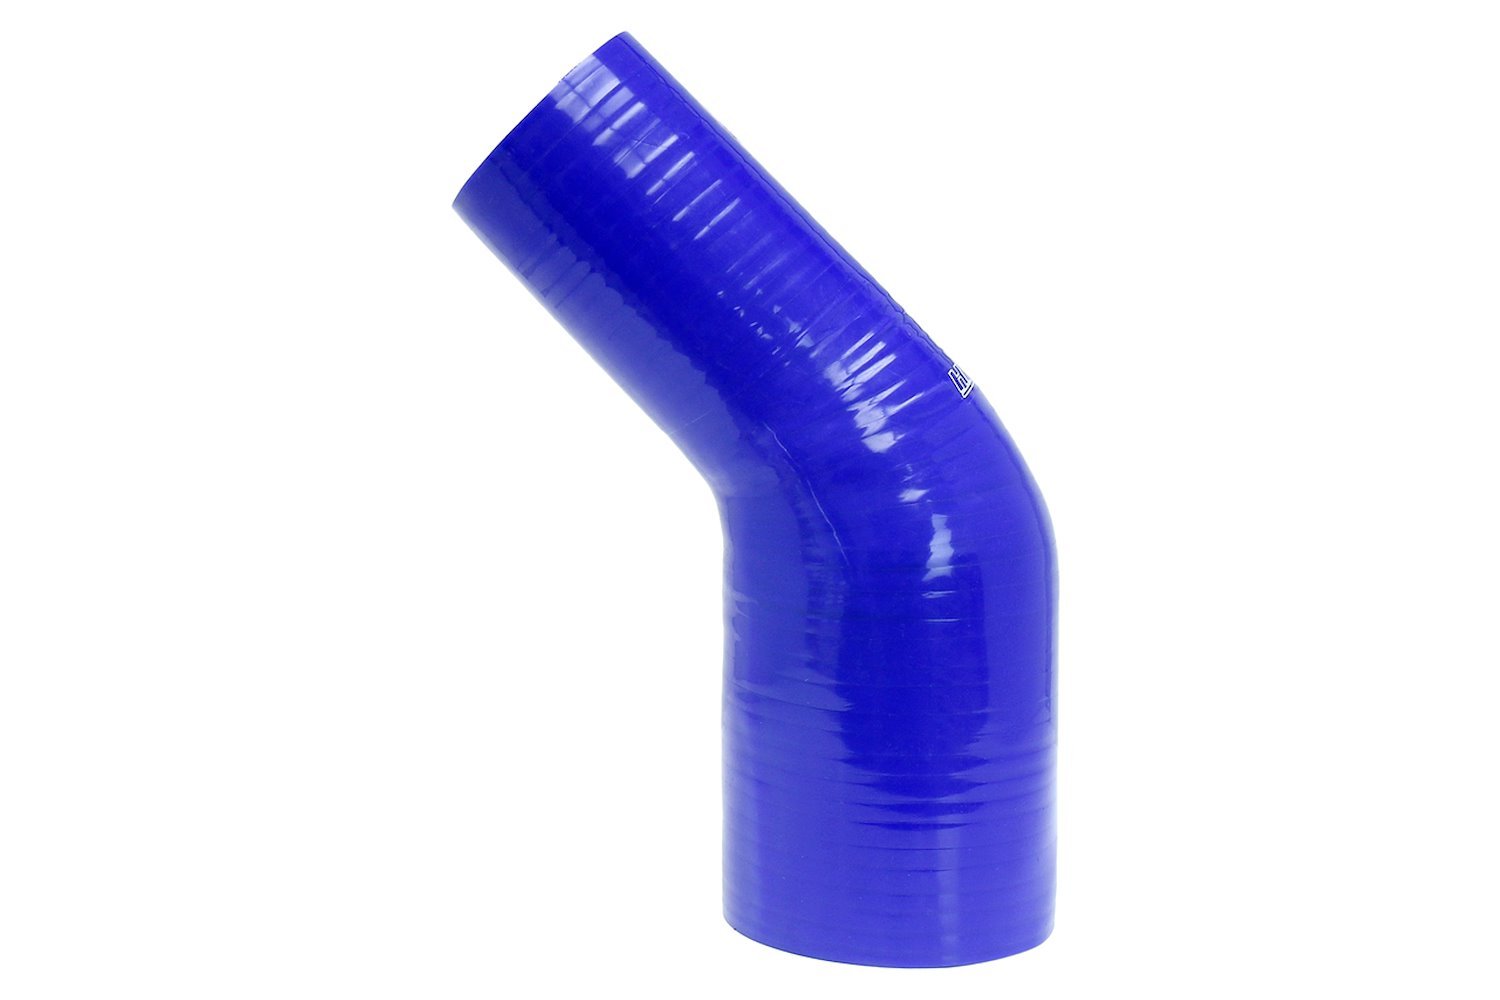 HTSER45-250-400-BLUE Silicone 45-Degree Elbow Hose, High-Temp 4-Ply Reinforced, 2-1/2 in. - 4 in. ID, Blue